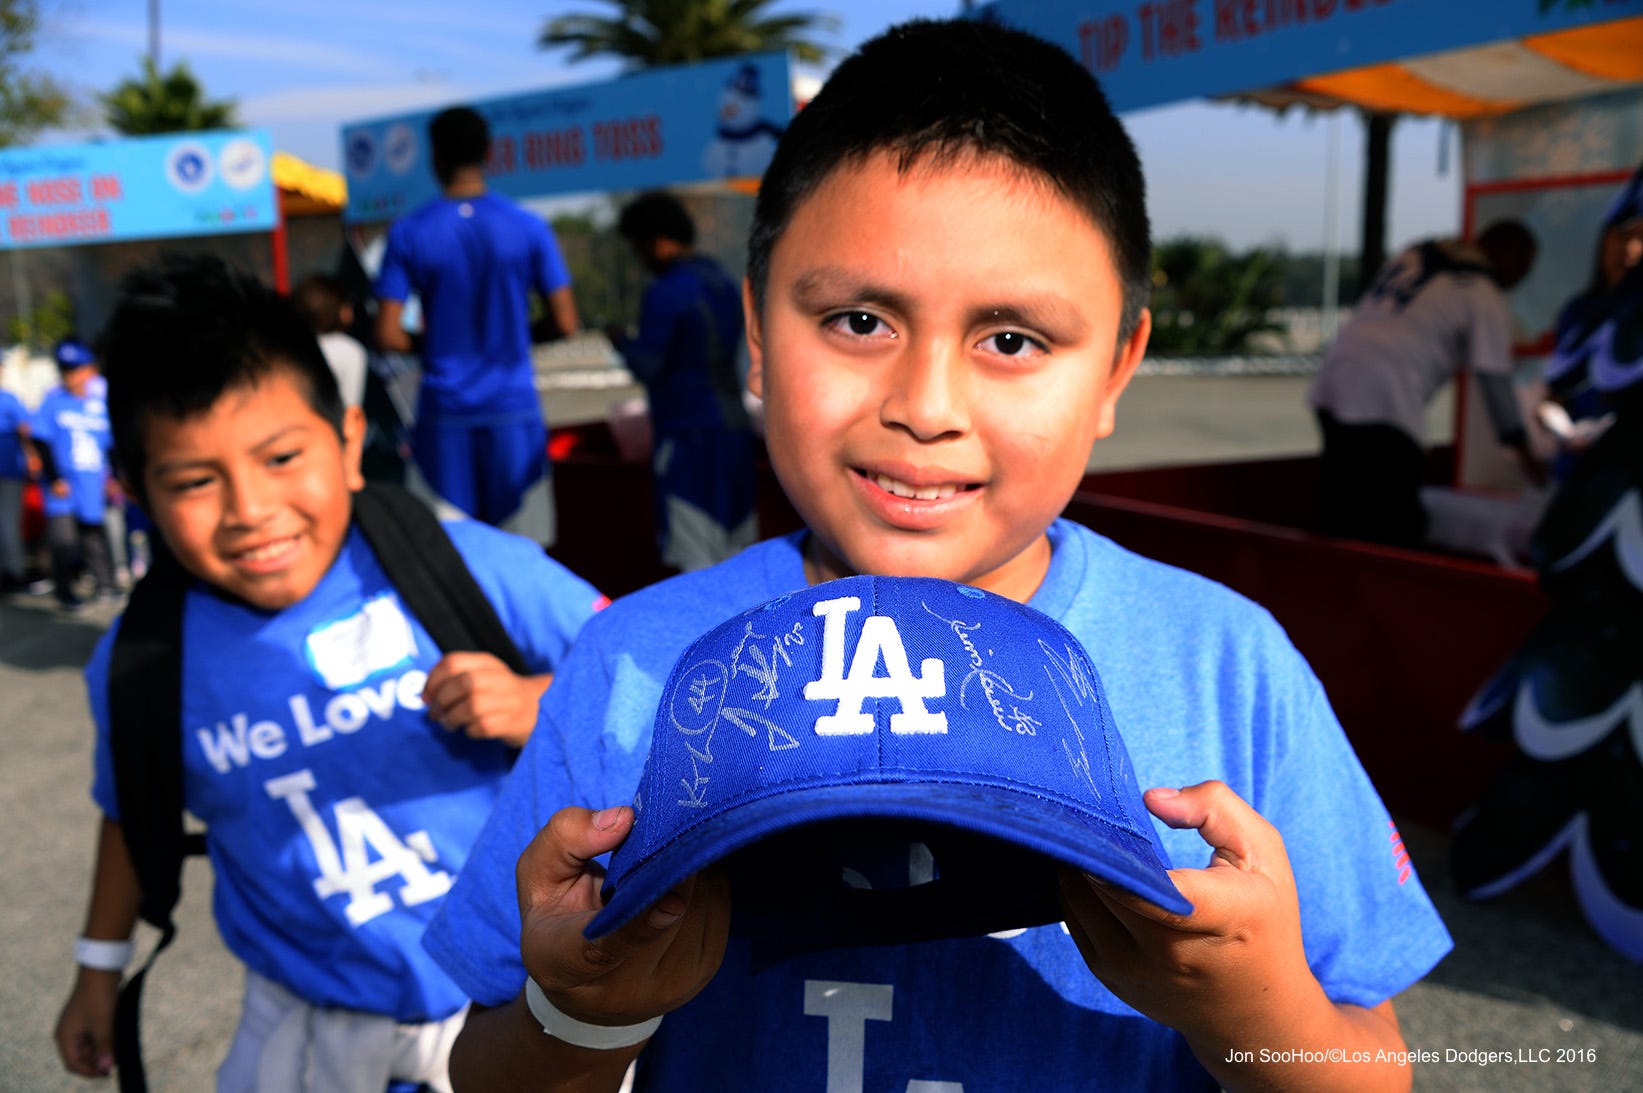 12/14/16-Something Fun-LA Dodgers Annual Children’s Holiday Party Photography by Jon ...1643 x 1093